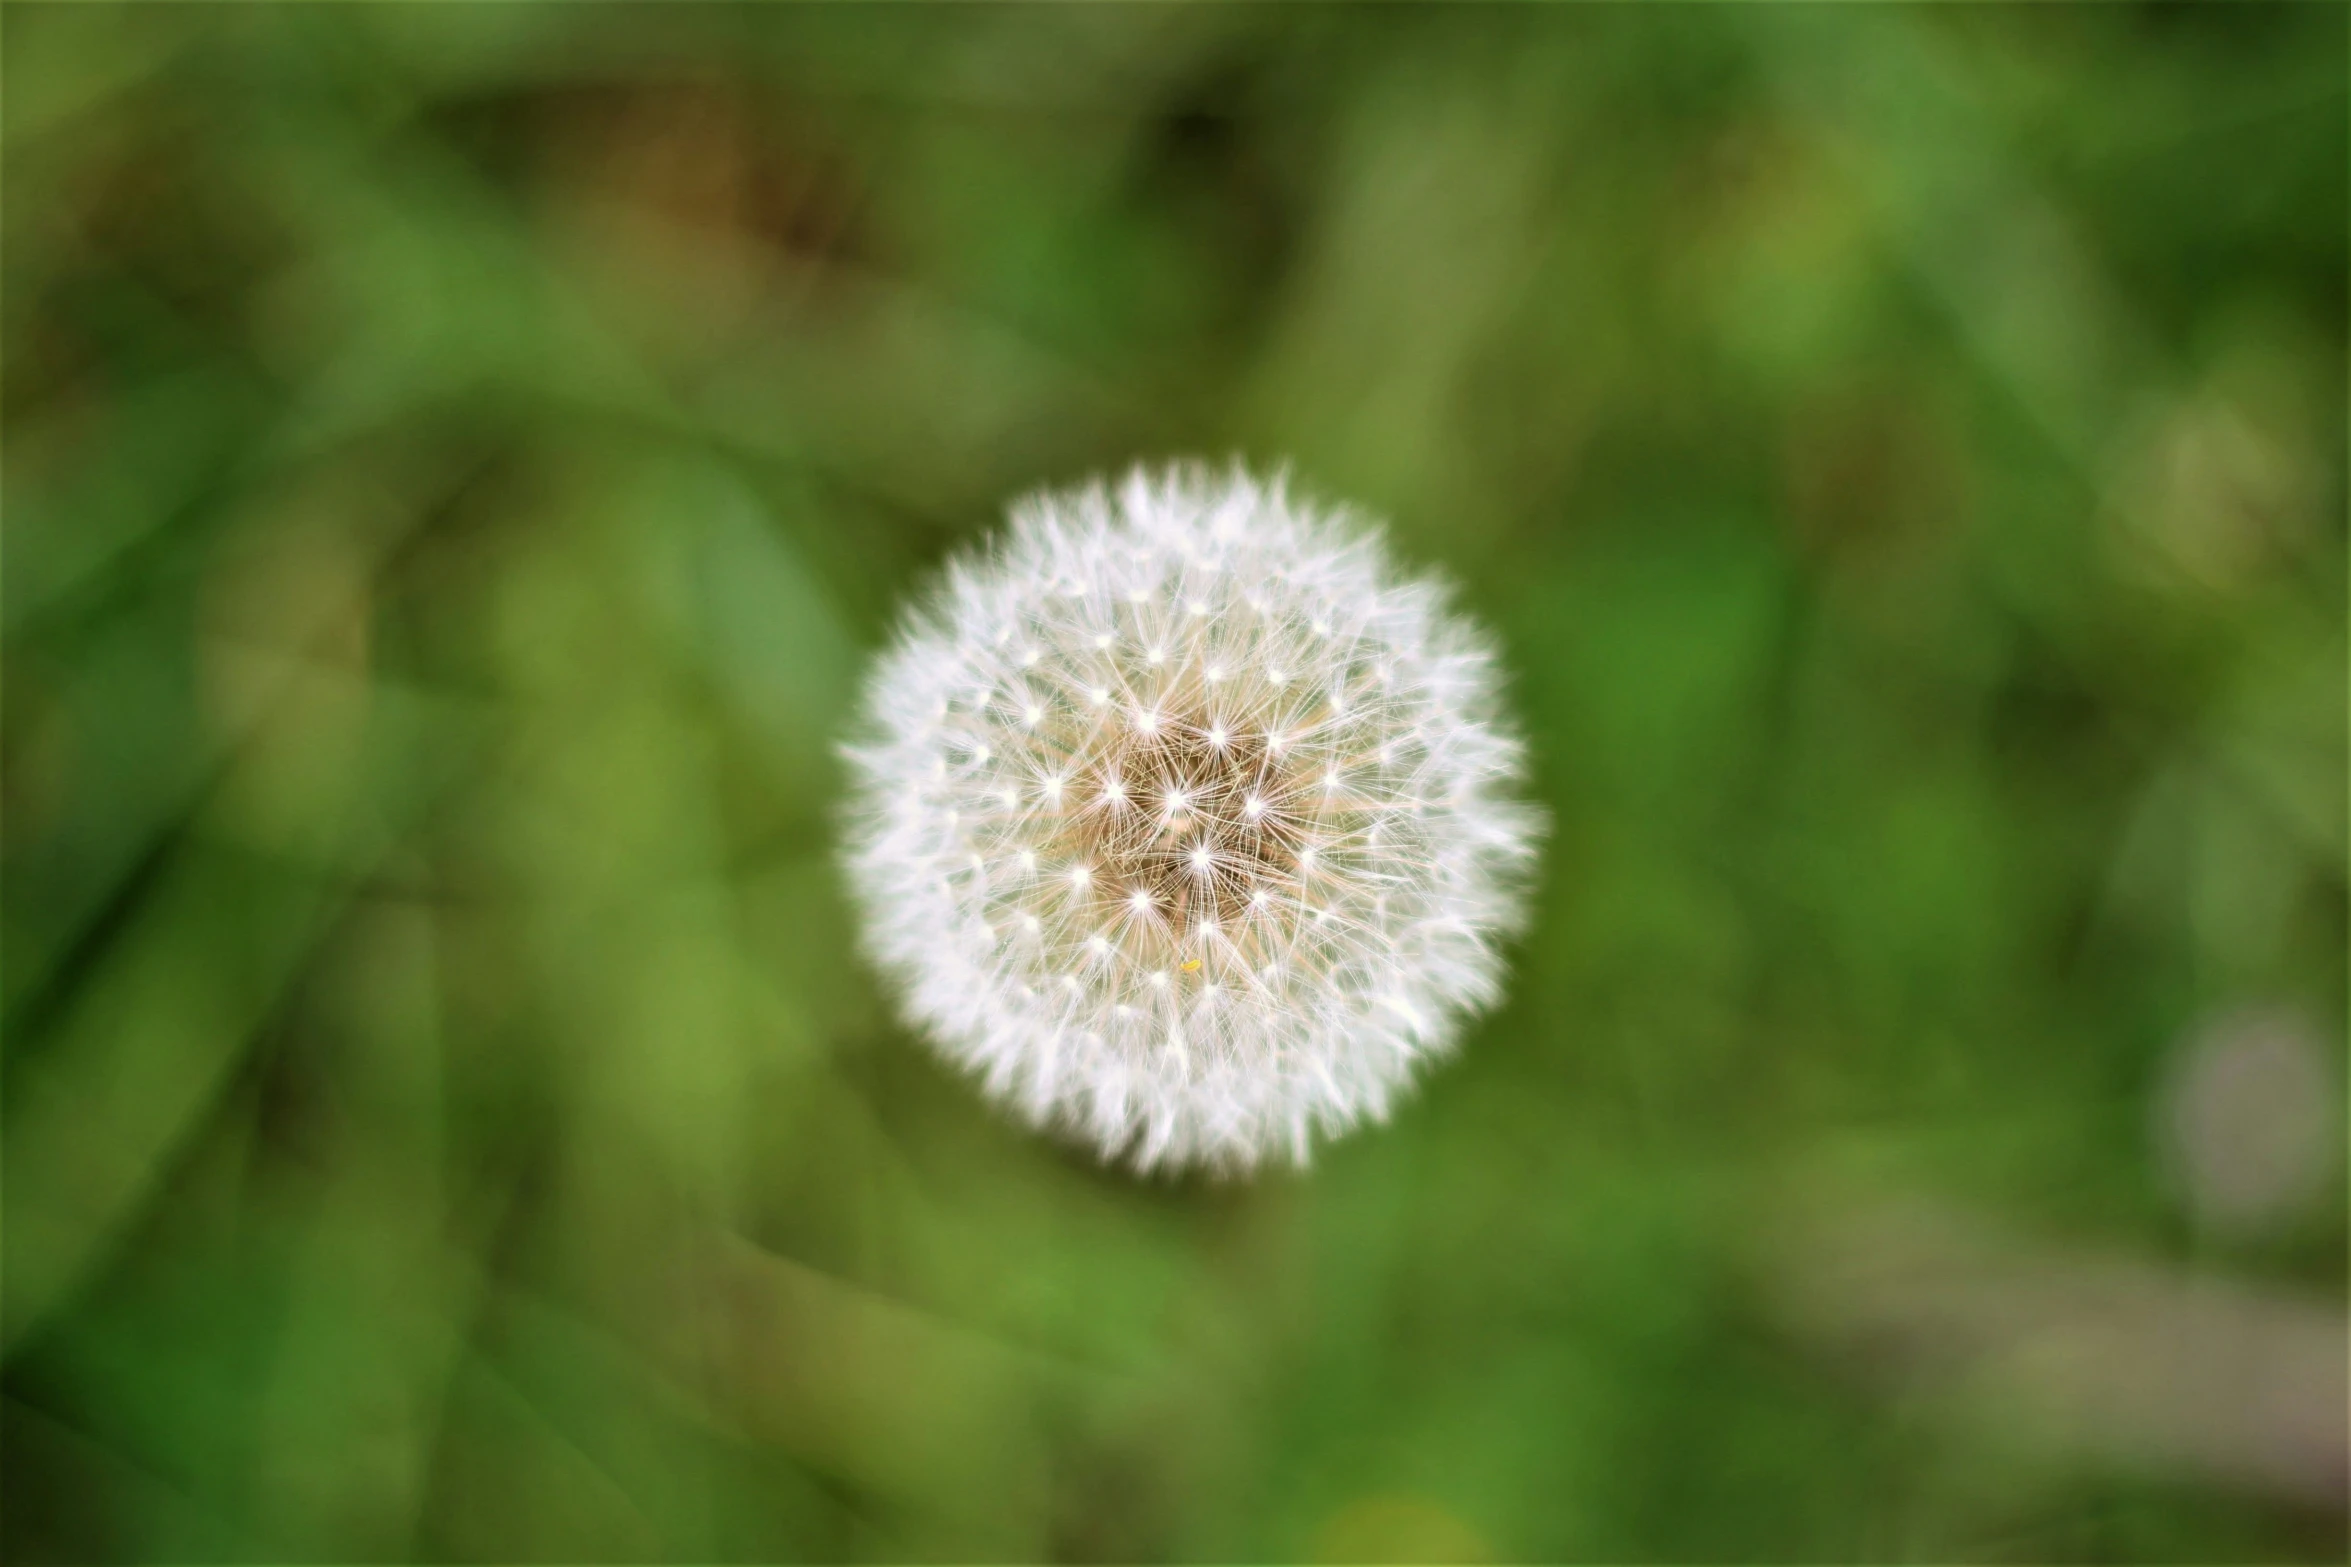 a large dandelion sits in front of some grass